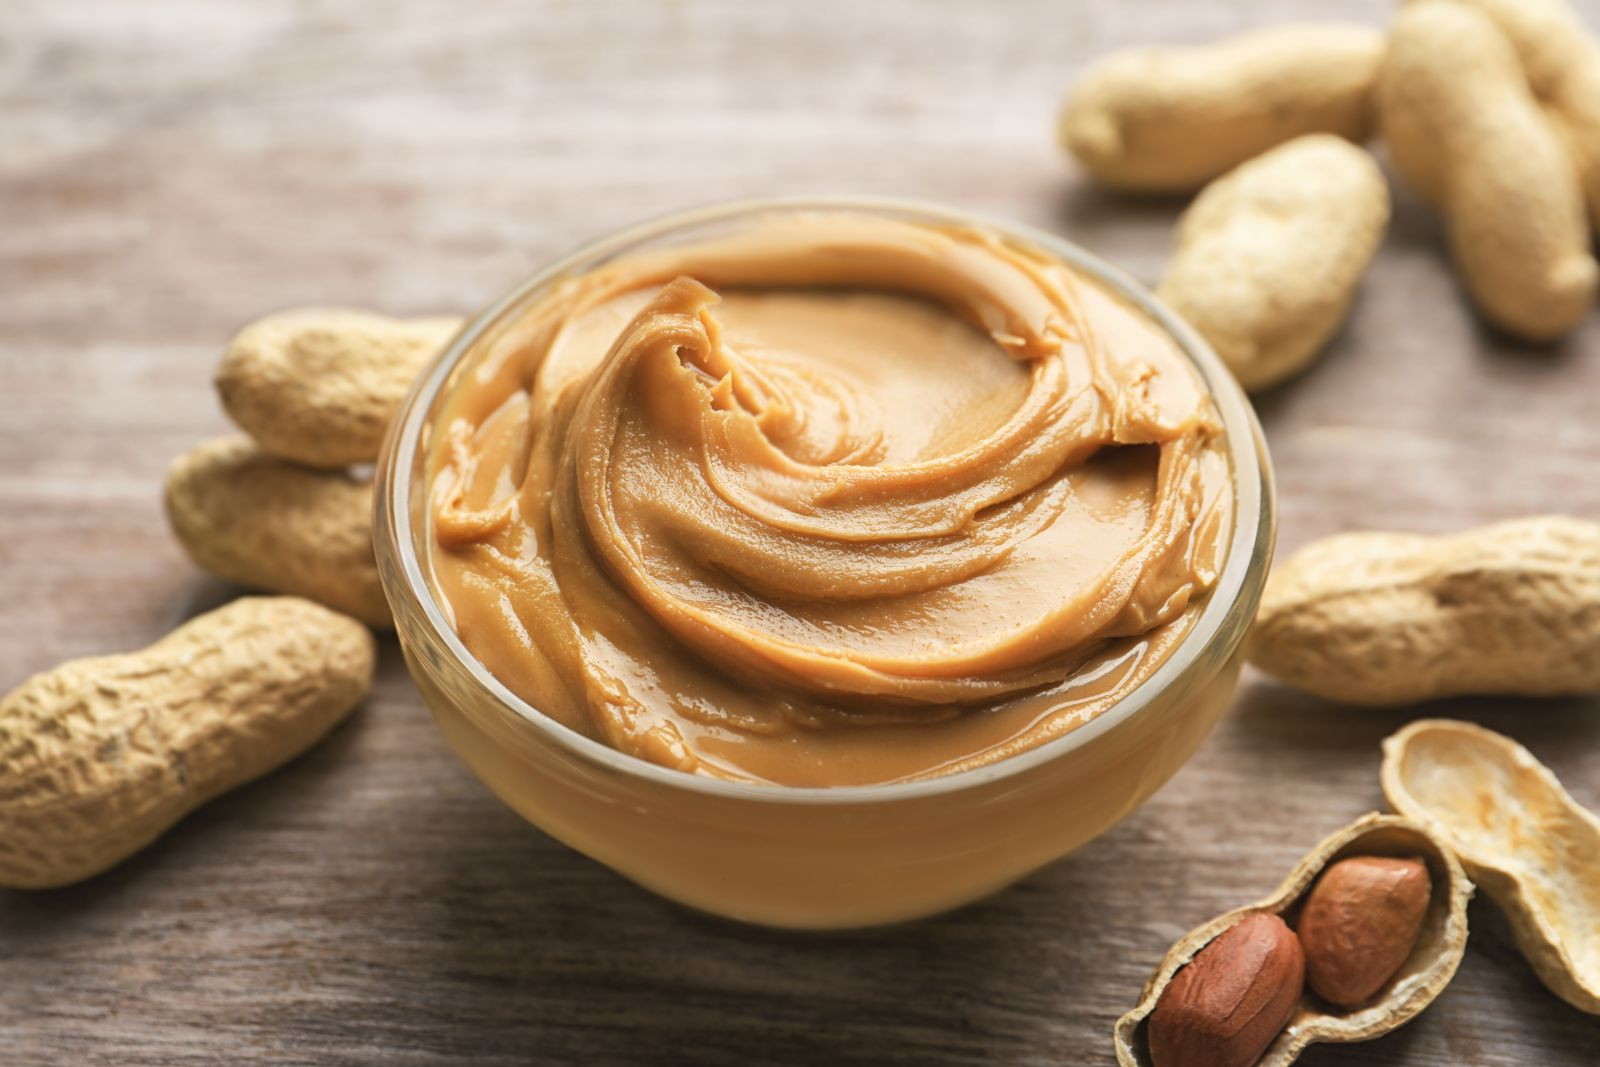 Using peanut butter for health purposes